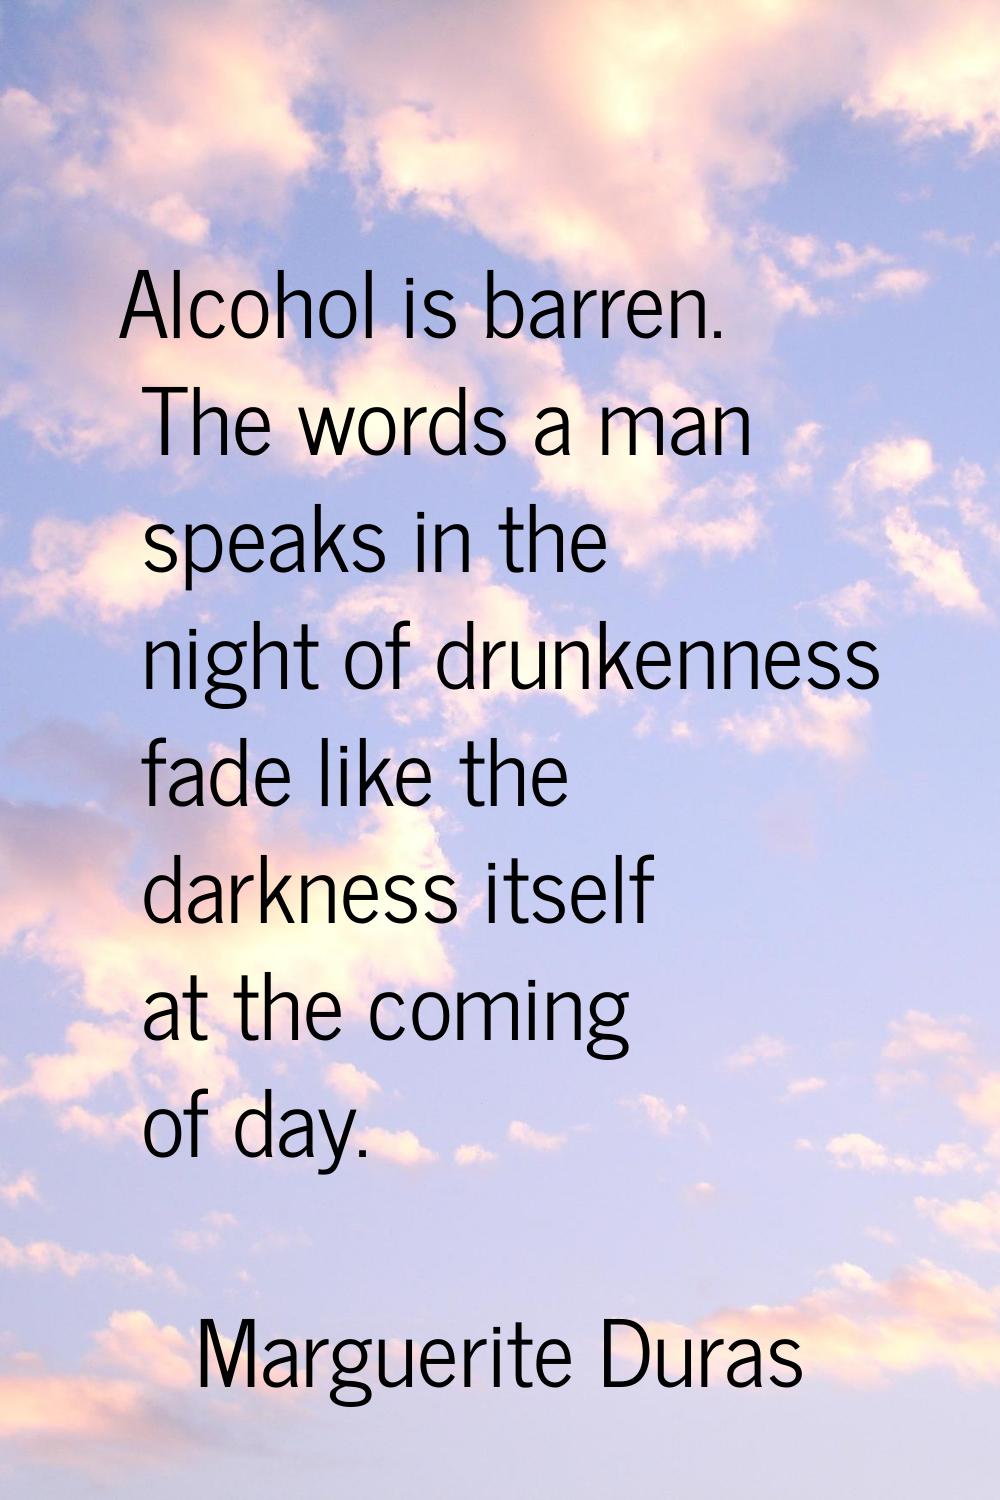 Alcohol is barren. The words a man speaks in the night of drunkenness fade like the darkness itself